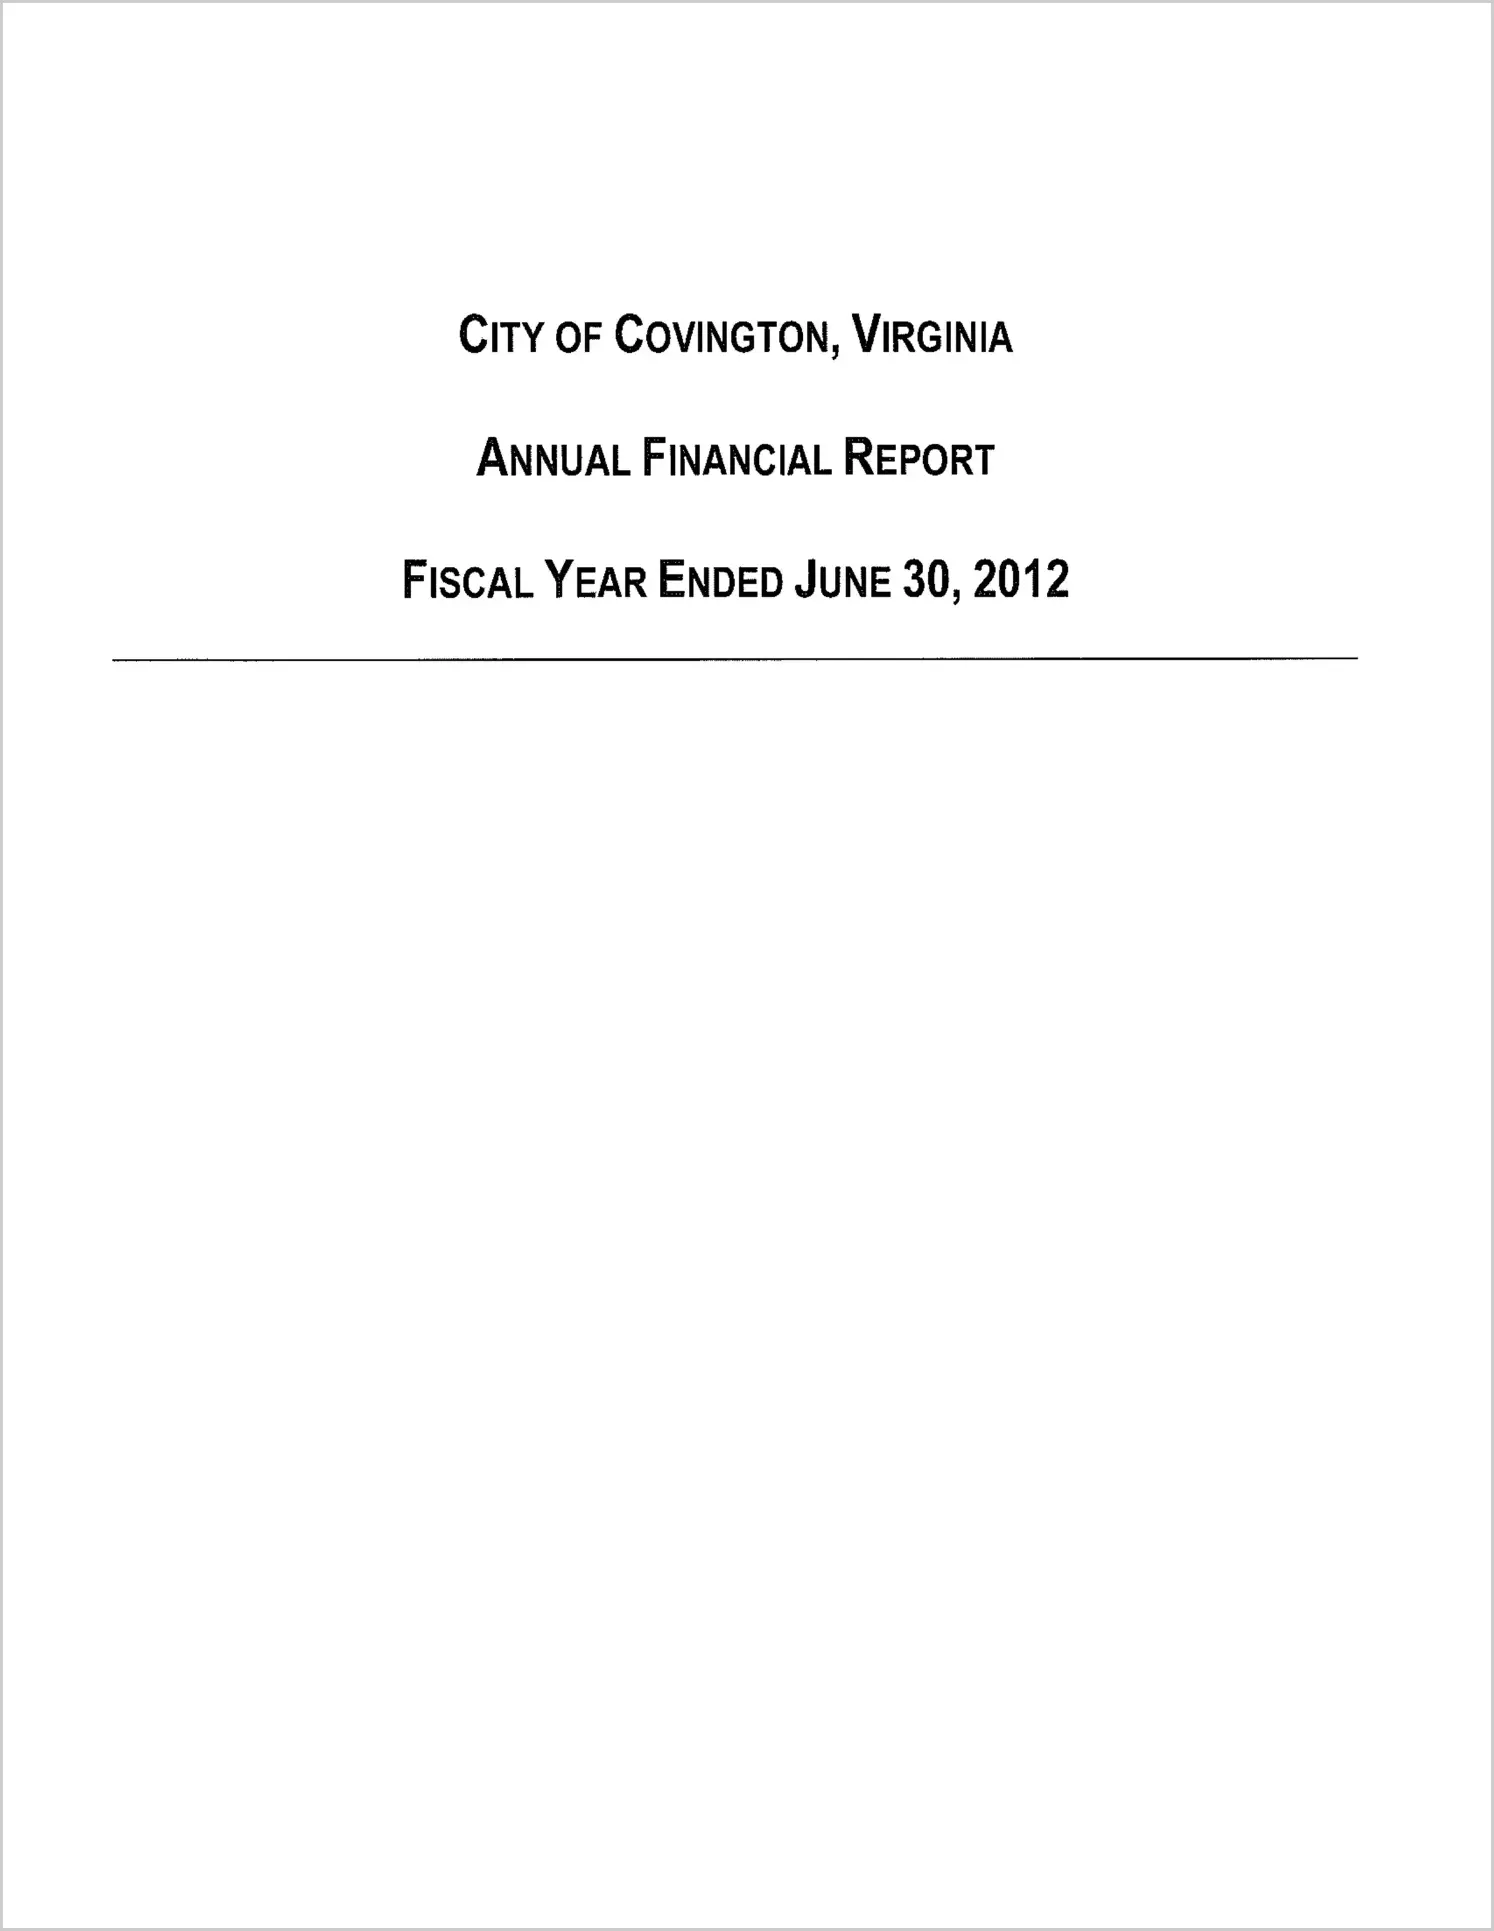 2012 Annual Financial Report for City of Covington